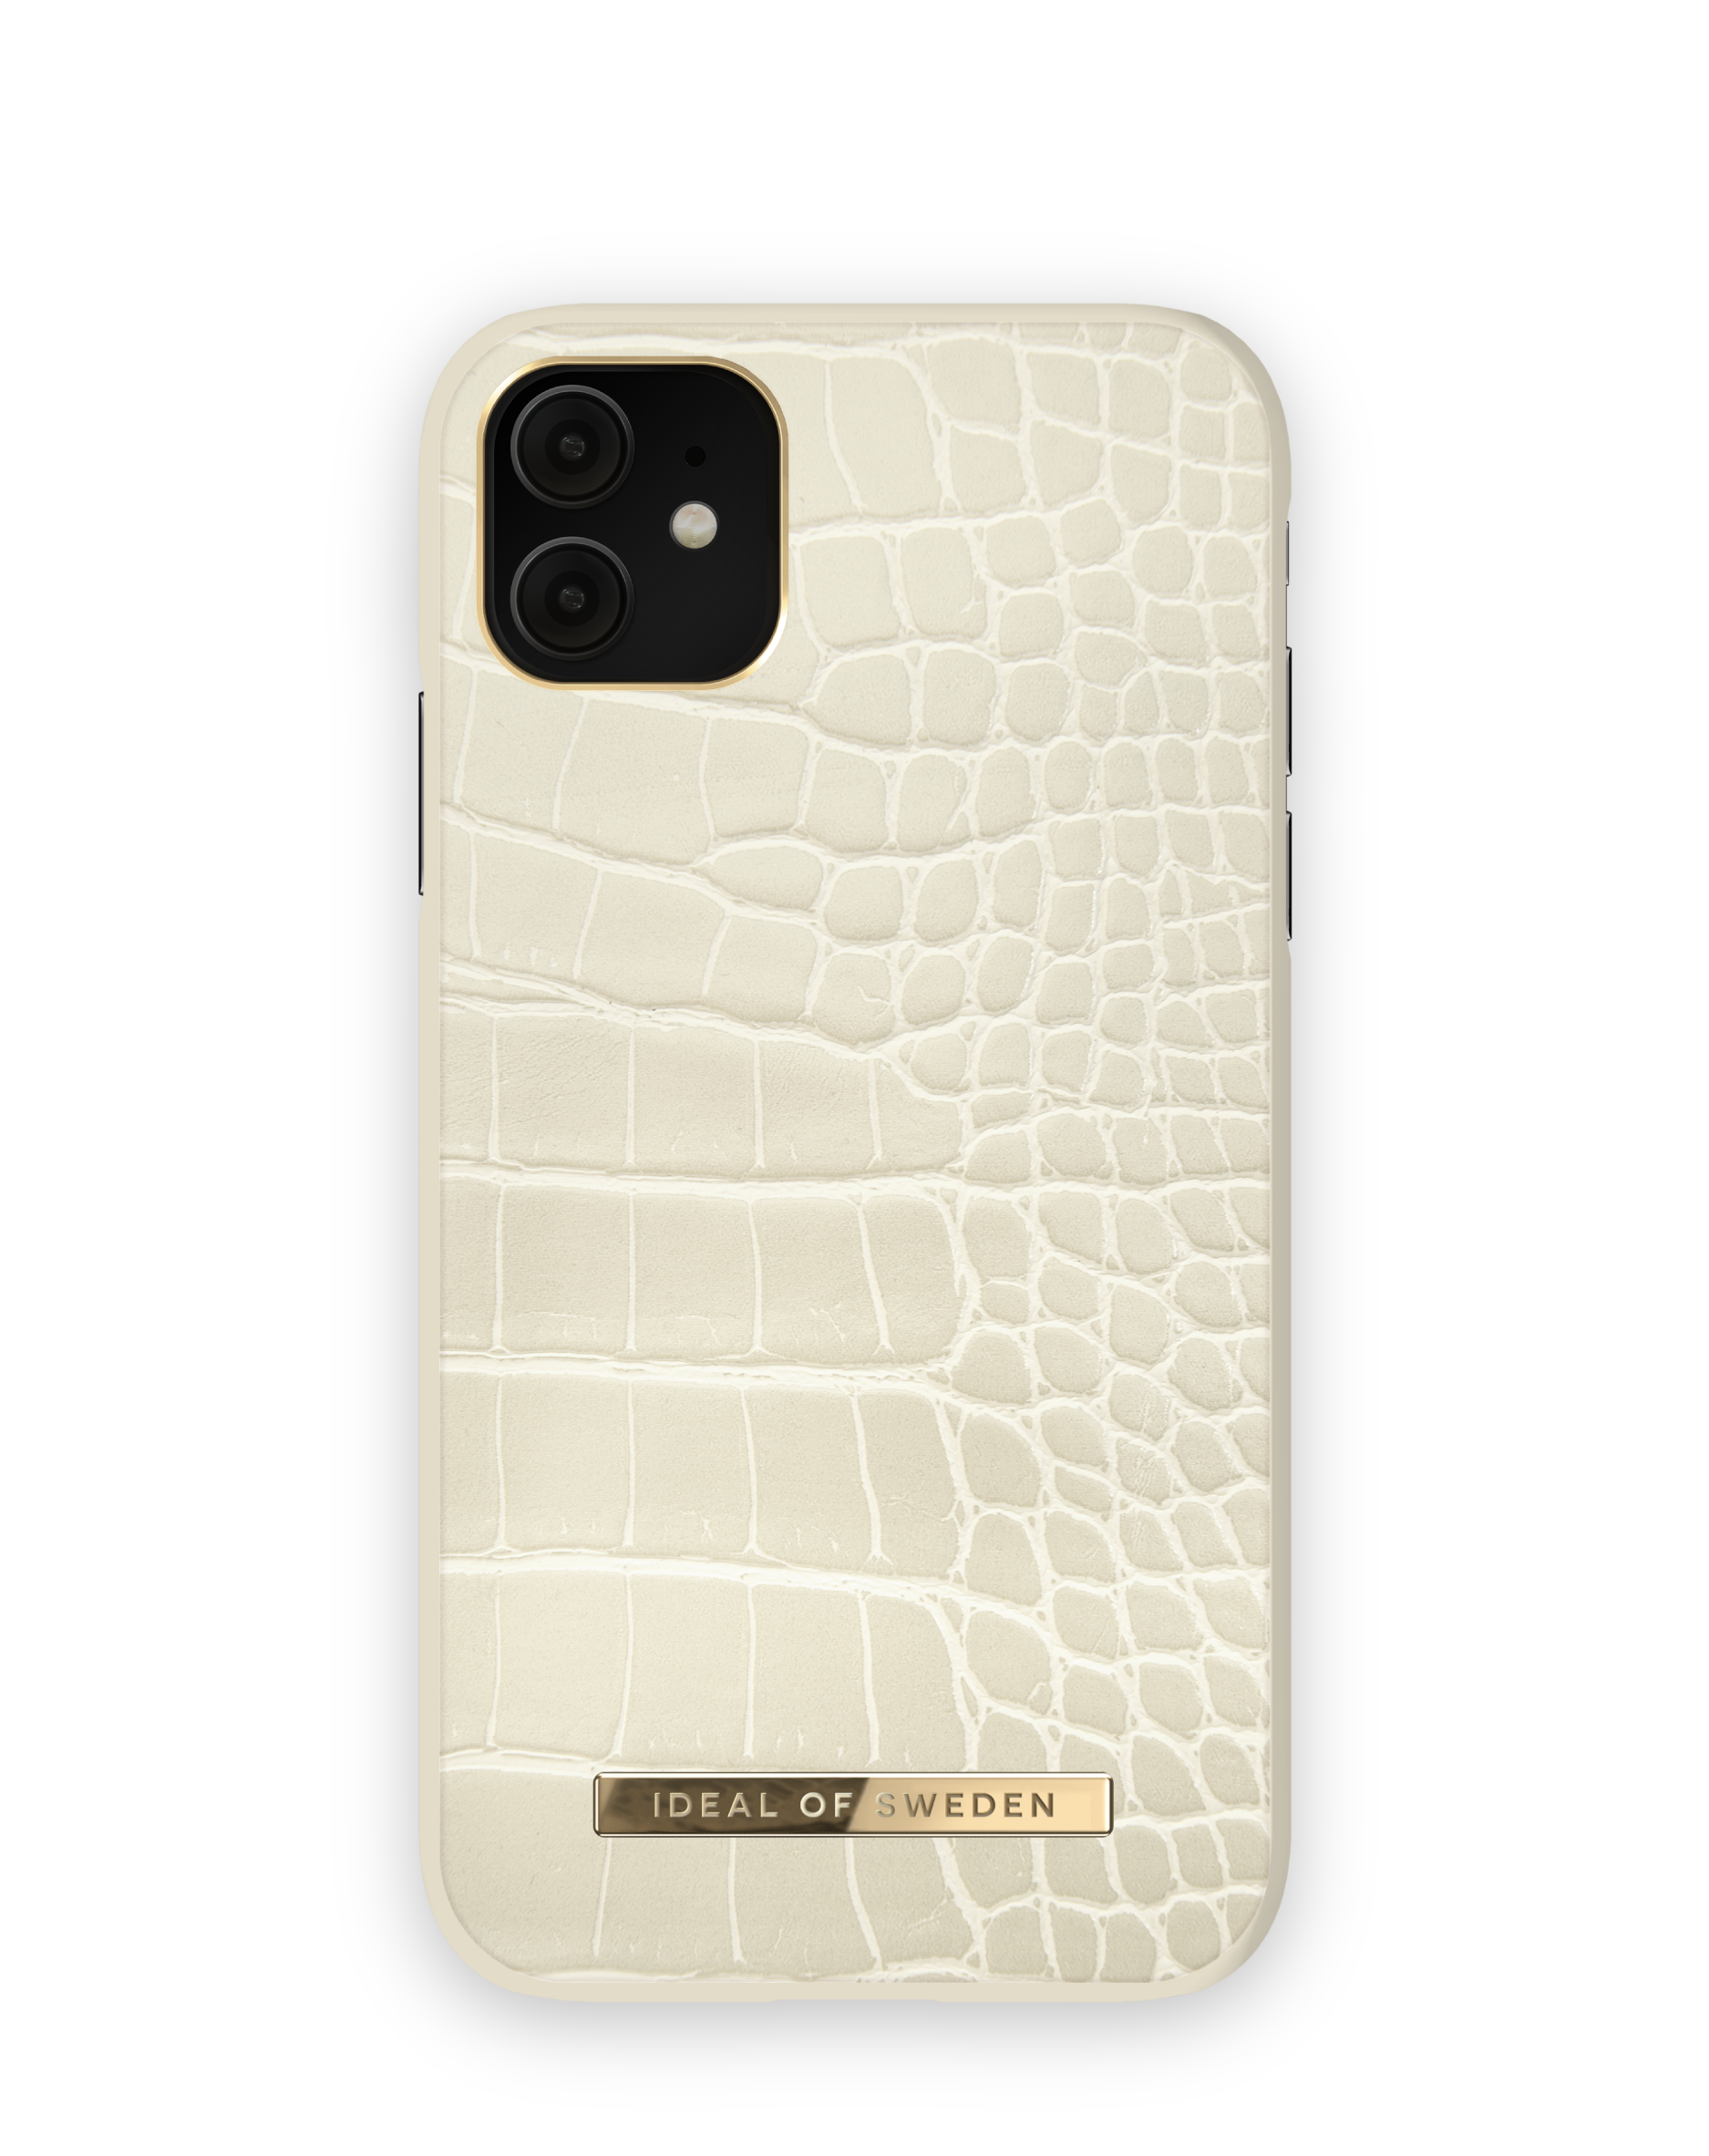 IDACSS22-I1961-395, iPhone SWEDEN Backcover, IDEAL OF Beige Apple, Recycled - 11 / iPhone XR, Croco Cream